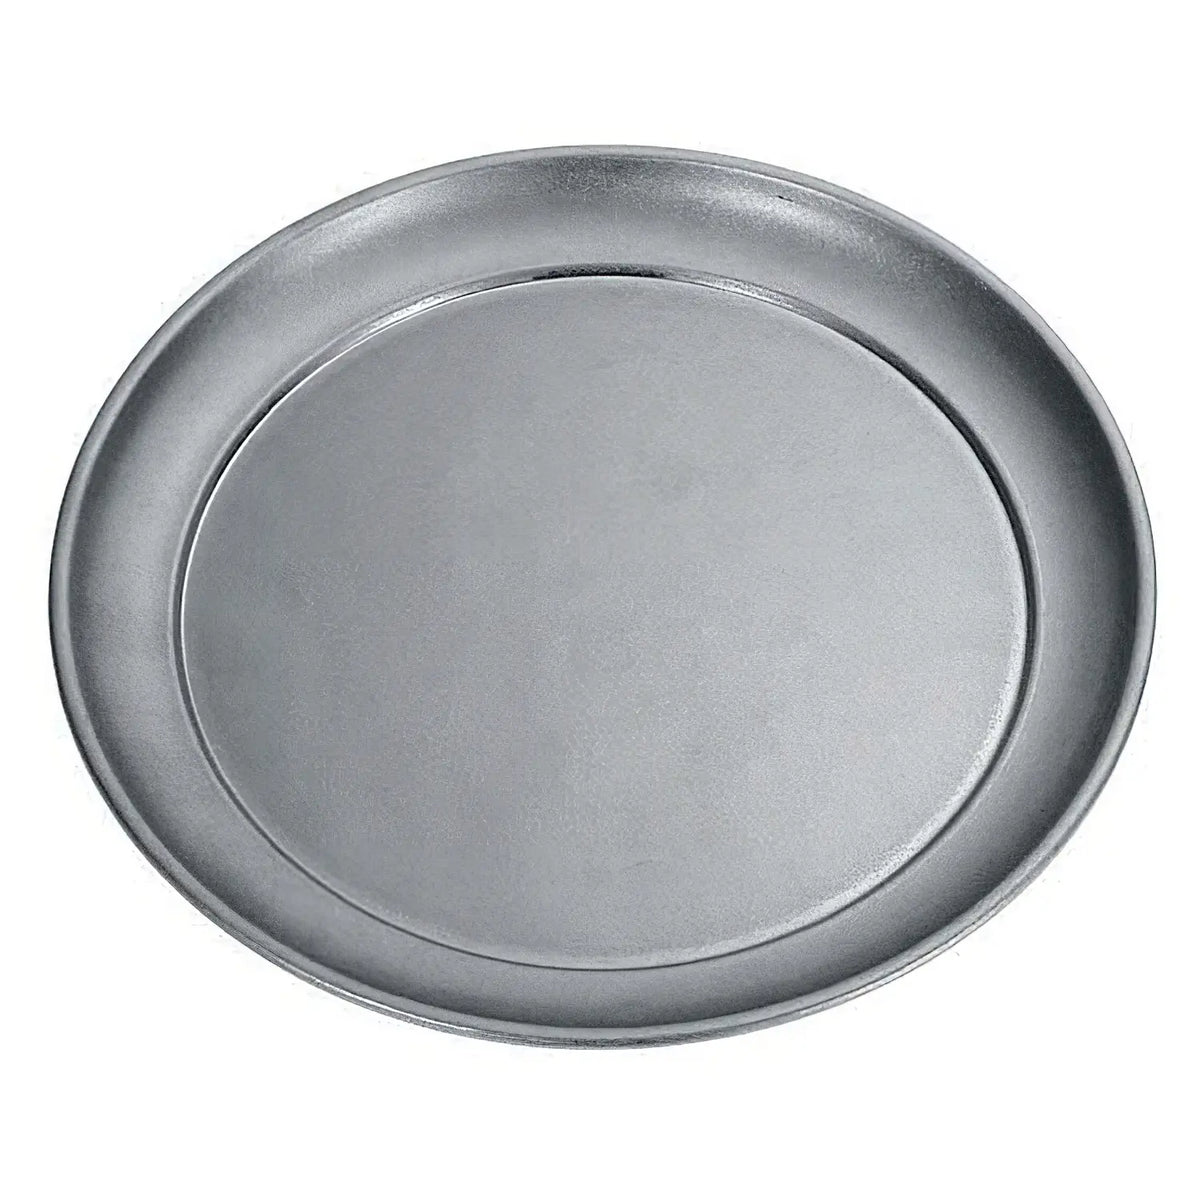 AOYOSHI VINTAGE Stainless Steel Round Serving Tray